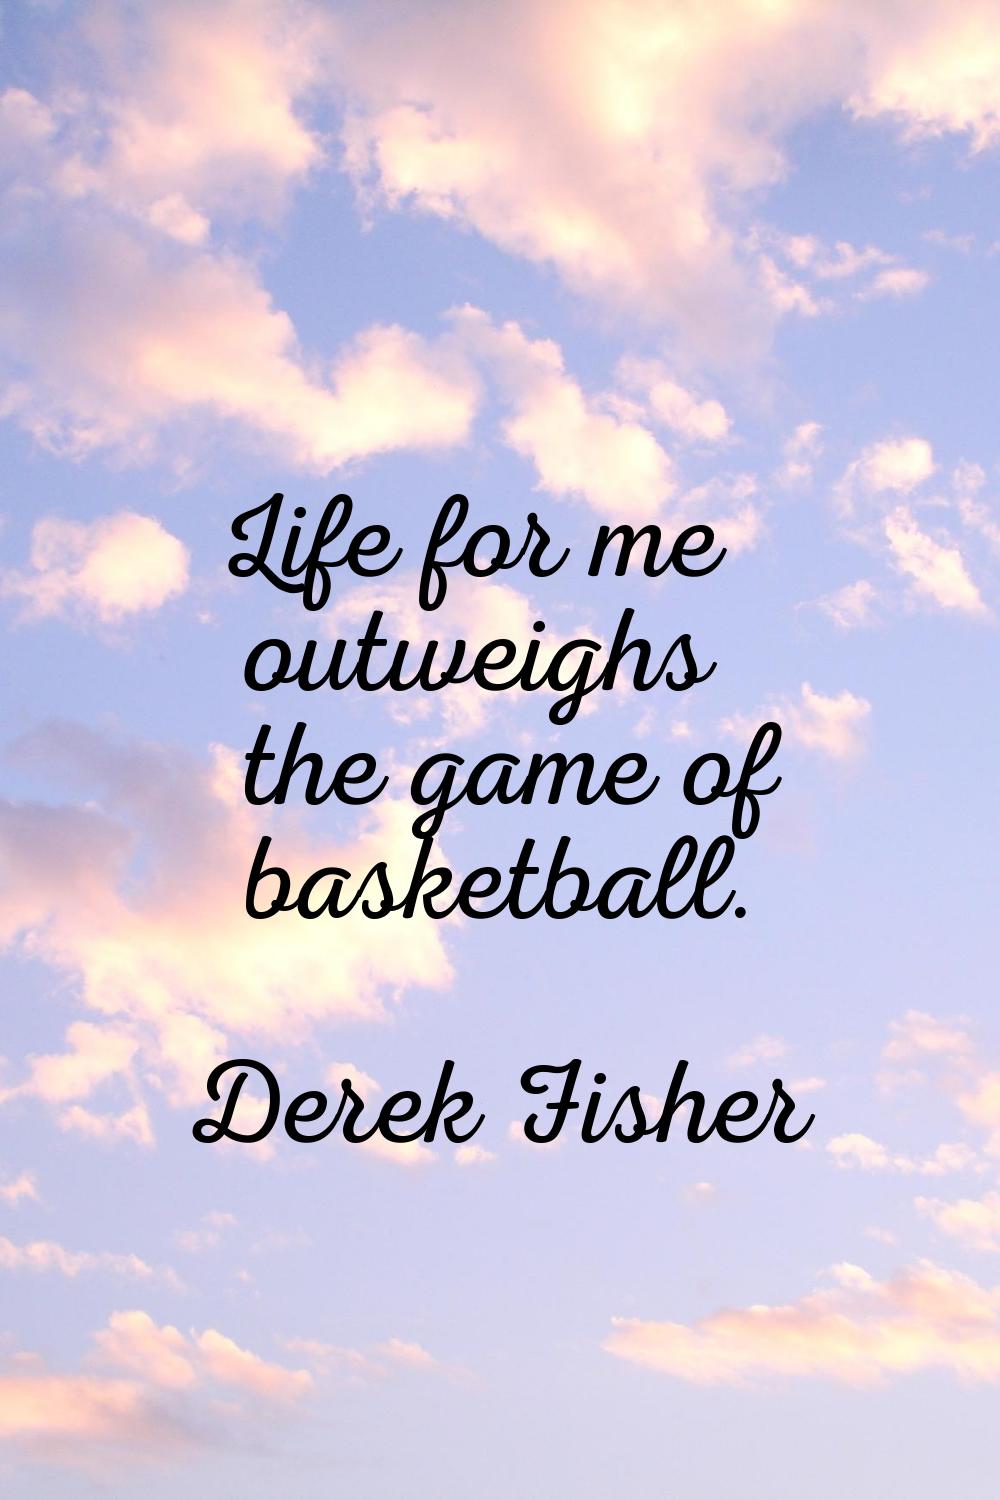 Life for me outweighs the game of basketball.